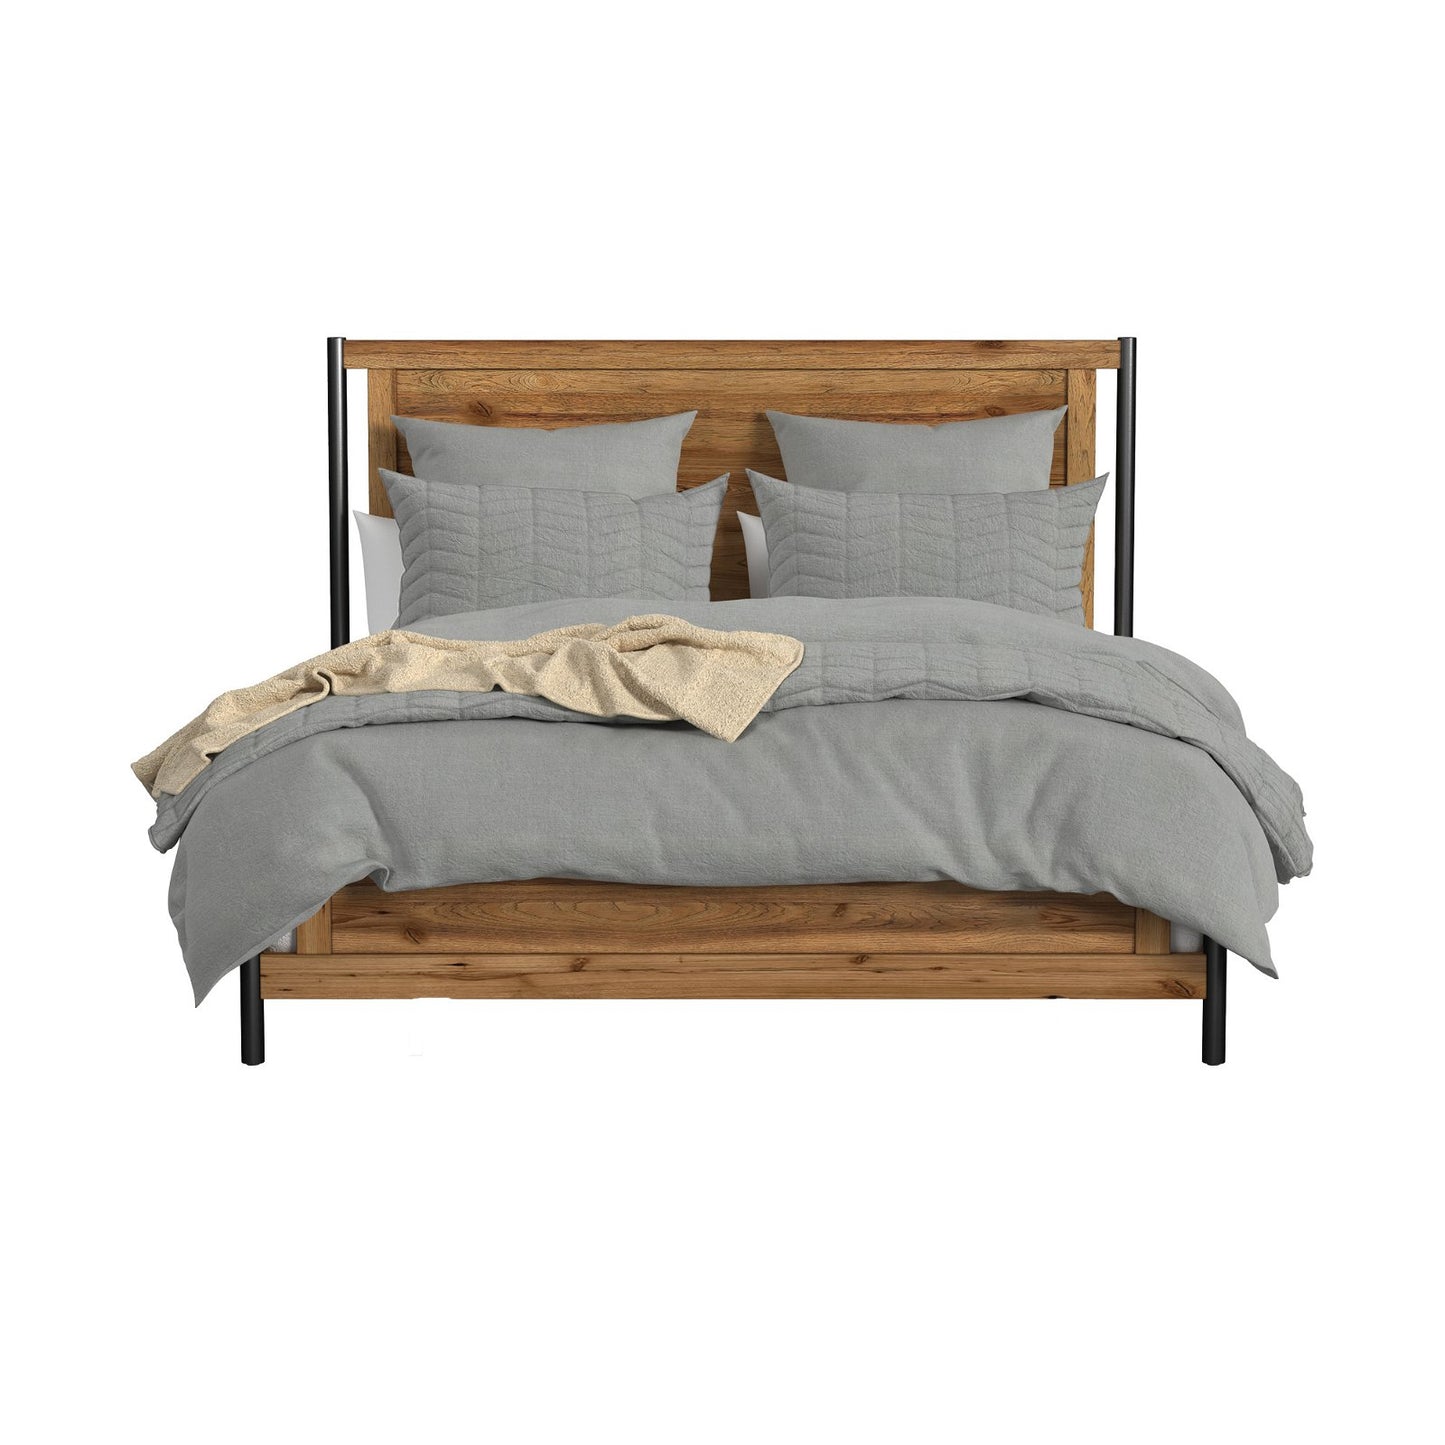 NORCROSS KING BED